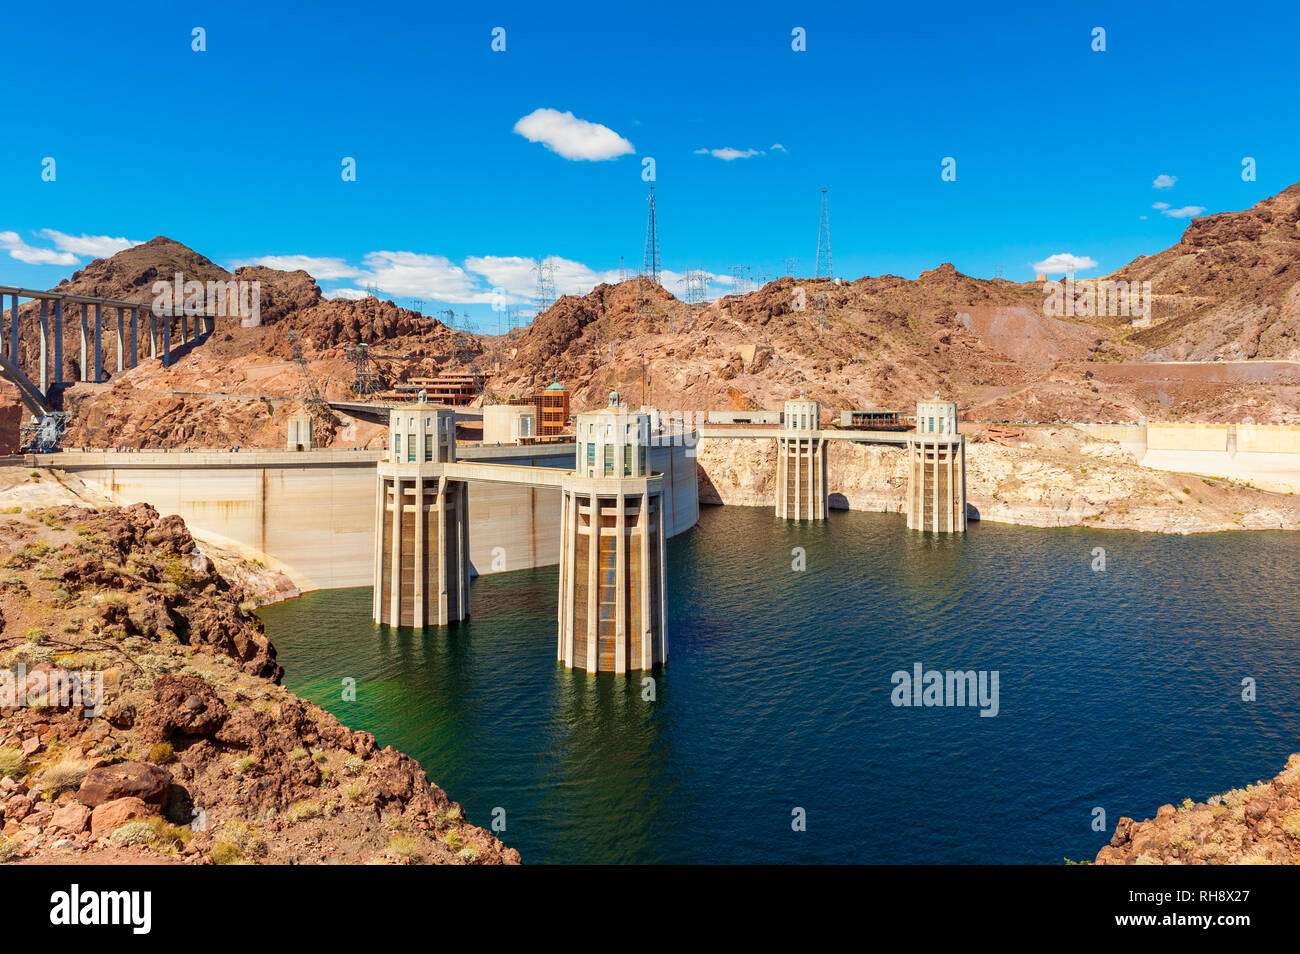 Hoover Dam on the border of U.S. states Nevada and Arizona. It was constructed between 1931 and 1936. Stock Photo